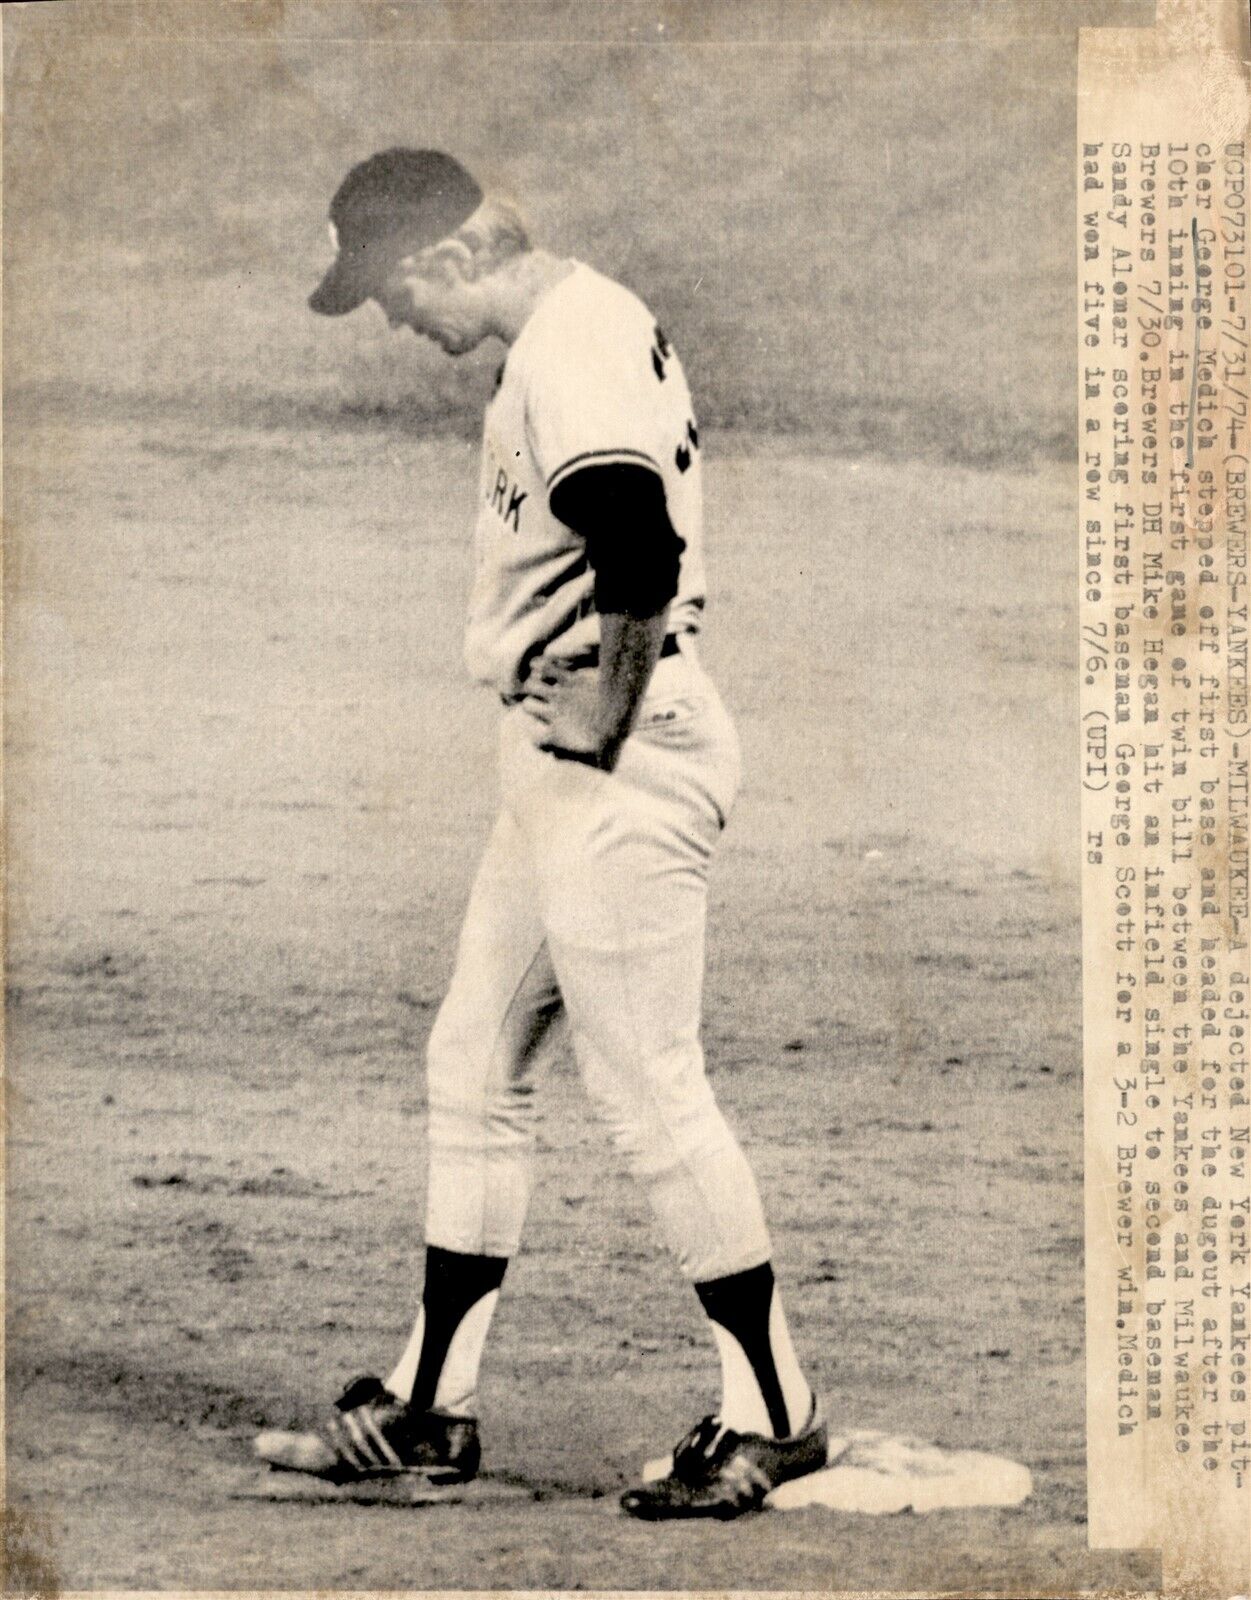 LG999 1974 Wire Photo DEJECTED NEW YORK YANKEES PITCHER GEORGE MEDICH vs BREWERS